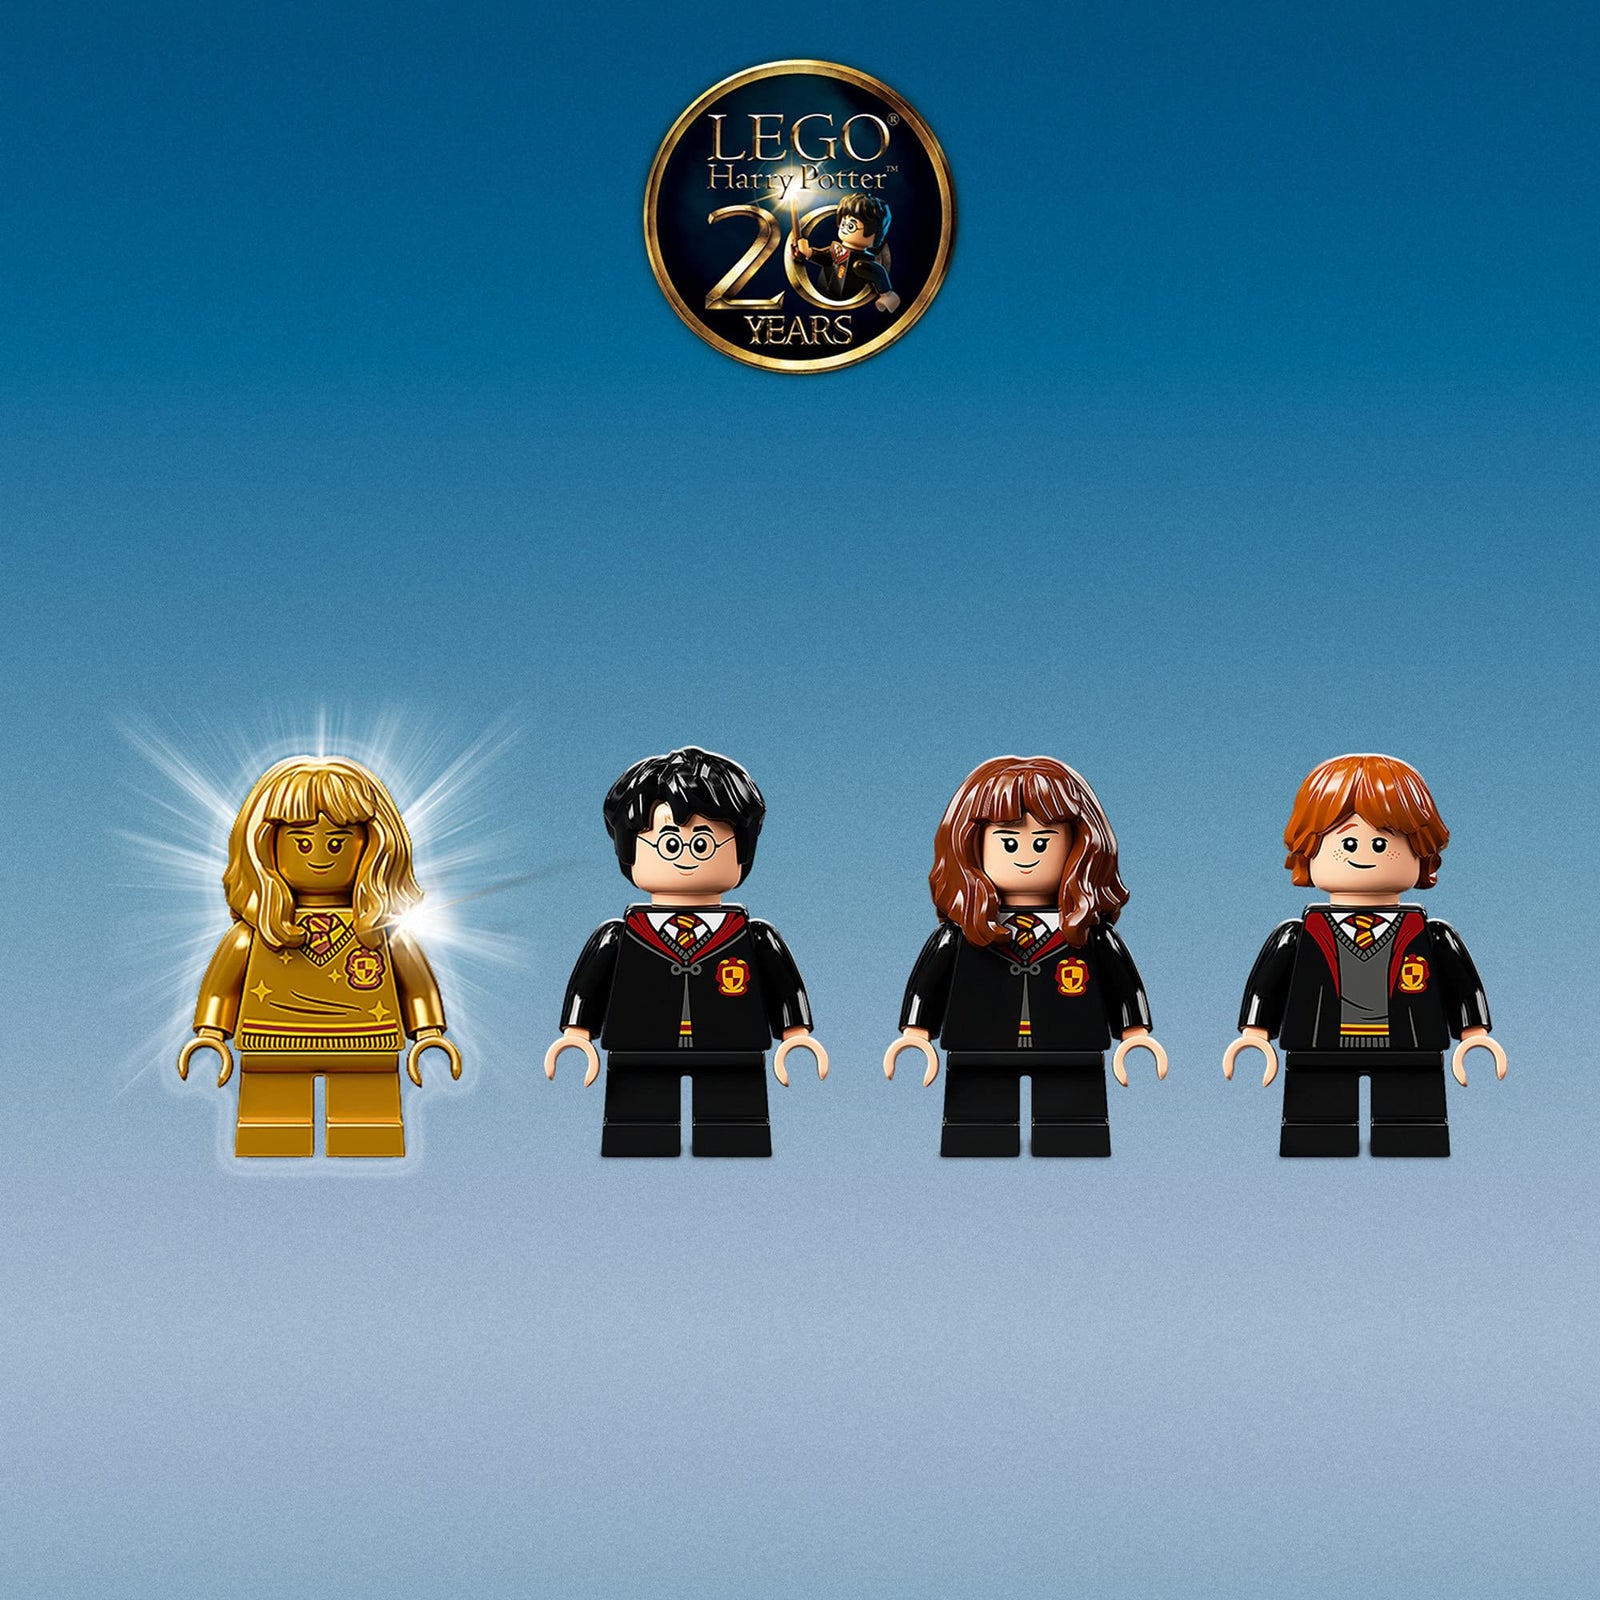 LEGO Harry Potter Hogwarts: Fluffy Encounter 76387 Building Kit; 3-Headed Dog Hogwarts Set; Cool, Collectible Toy; New 2021 (397 Pieces)